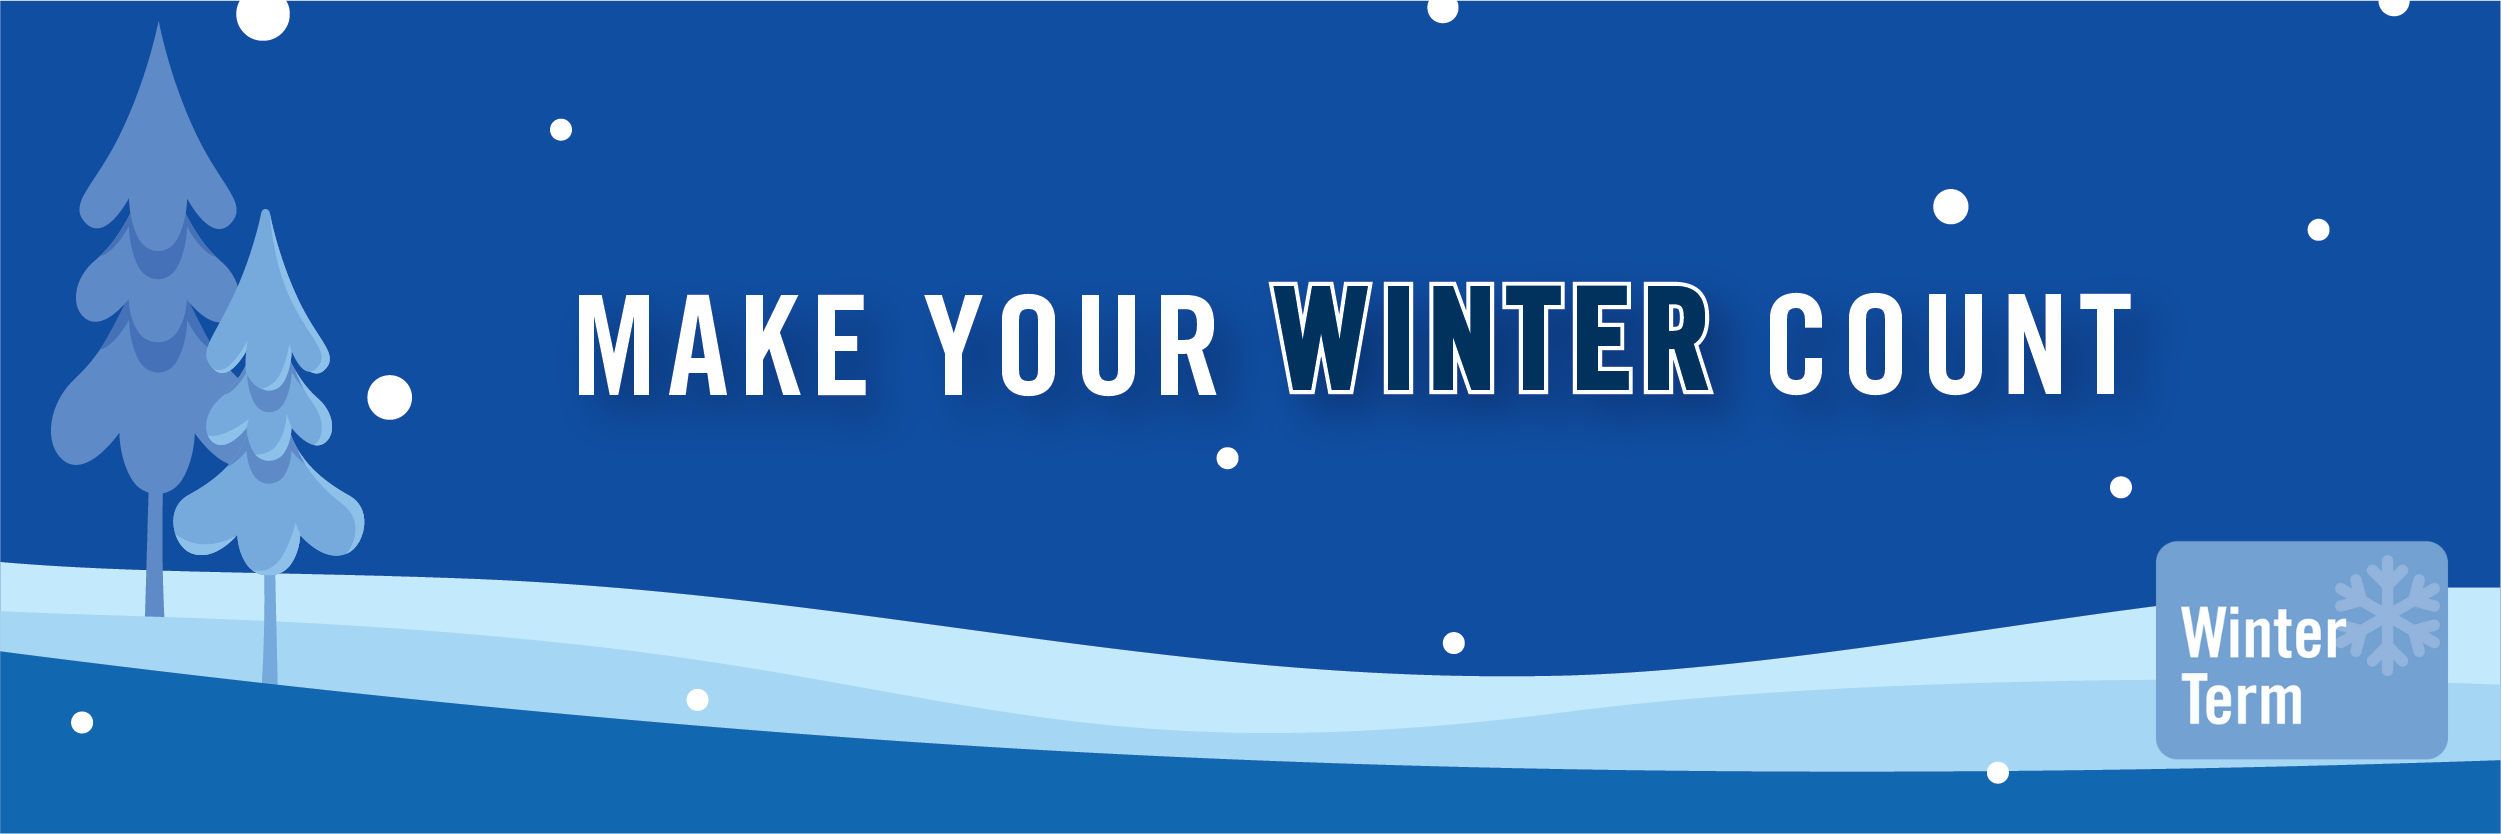 Make your winter count! Winter at CSUMB